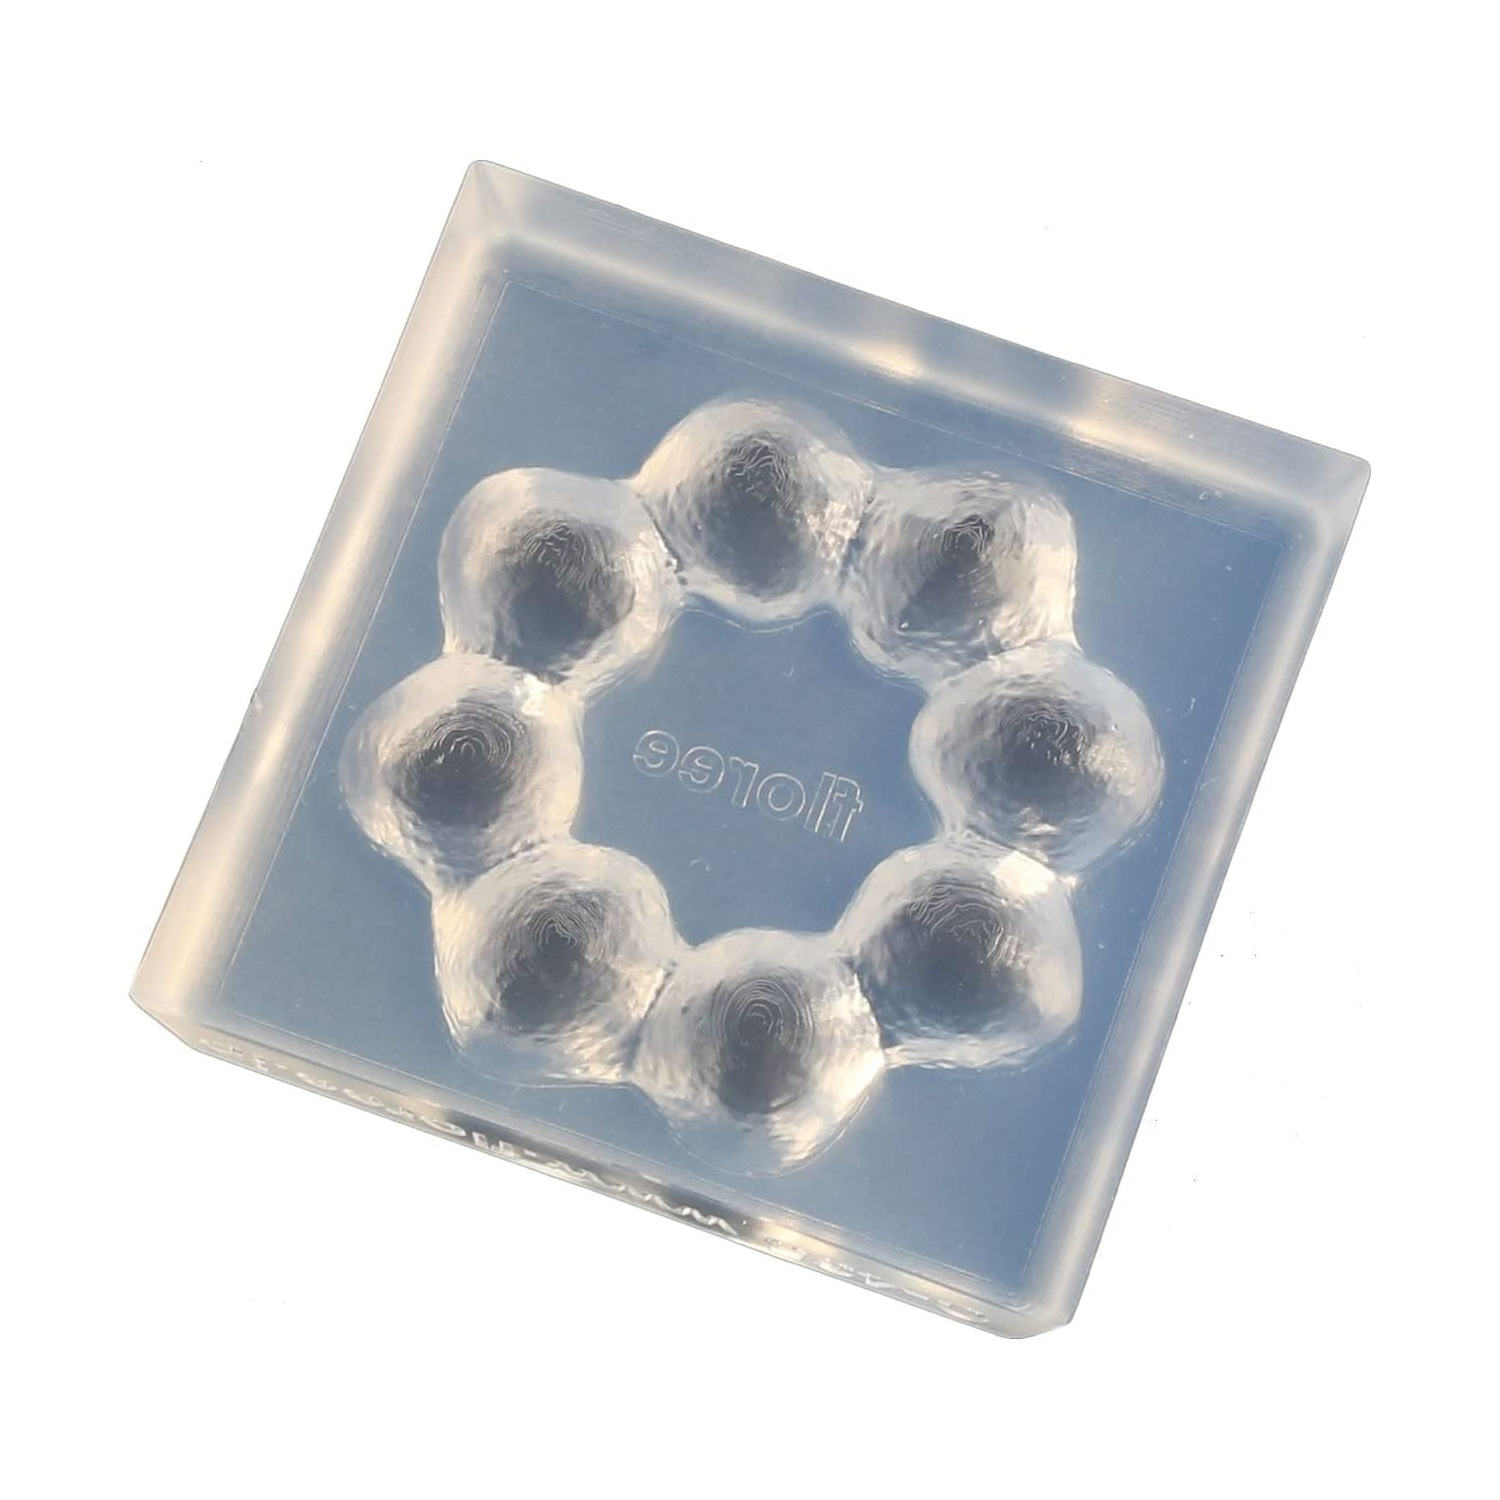 KAM-REJ-435  Resin Crafting Silicone Mold  (pcs)